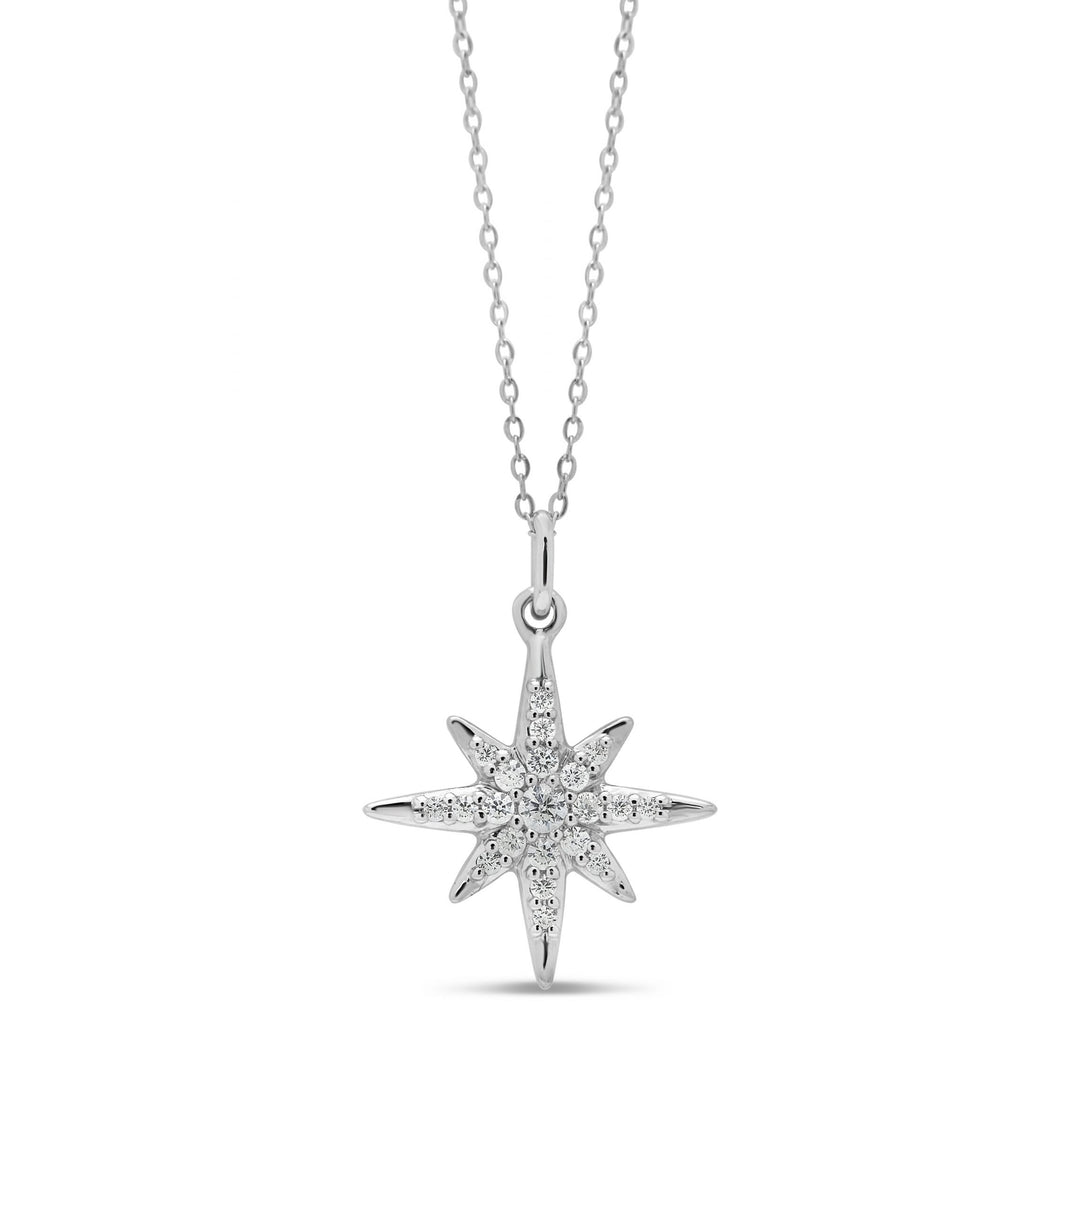 Elegant 10K white gold North Star pendant adorned with 0.10 ct of diamonds, hanging on a matching white gold chain, ideal for a touch of celestial charm.